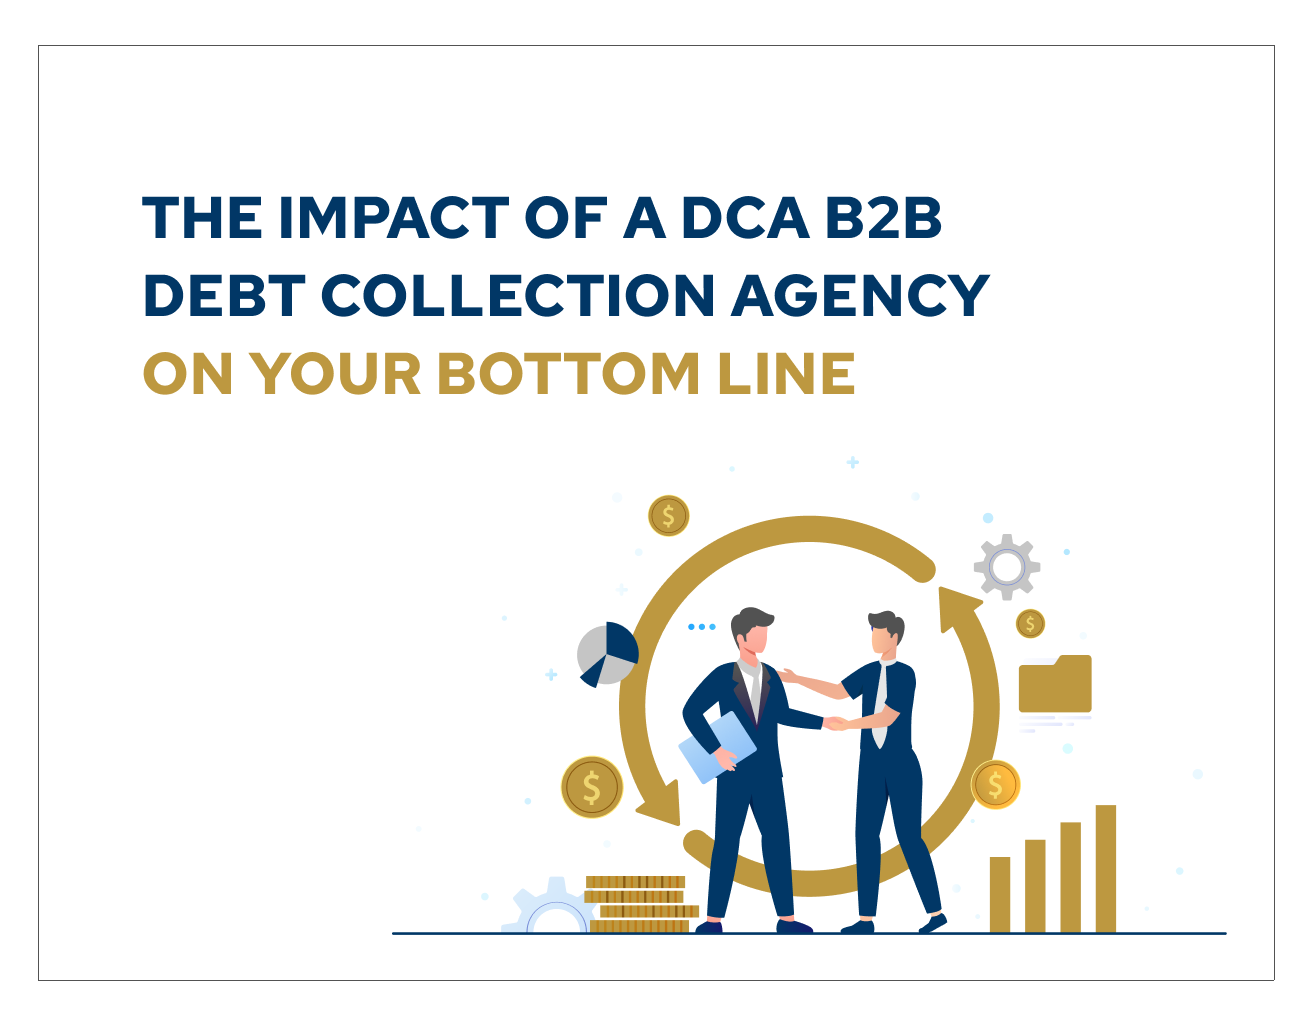 DCA B2B Debt Collection Agency on Your Bottom Line